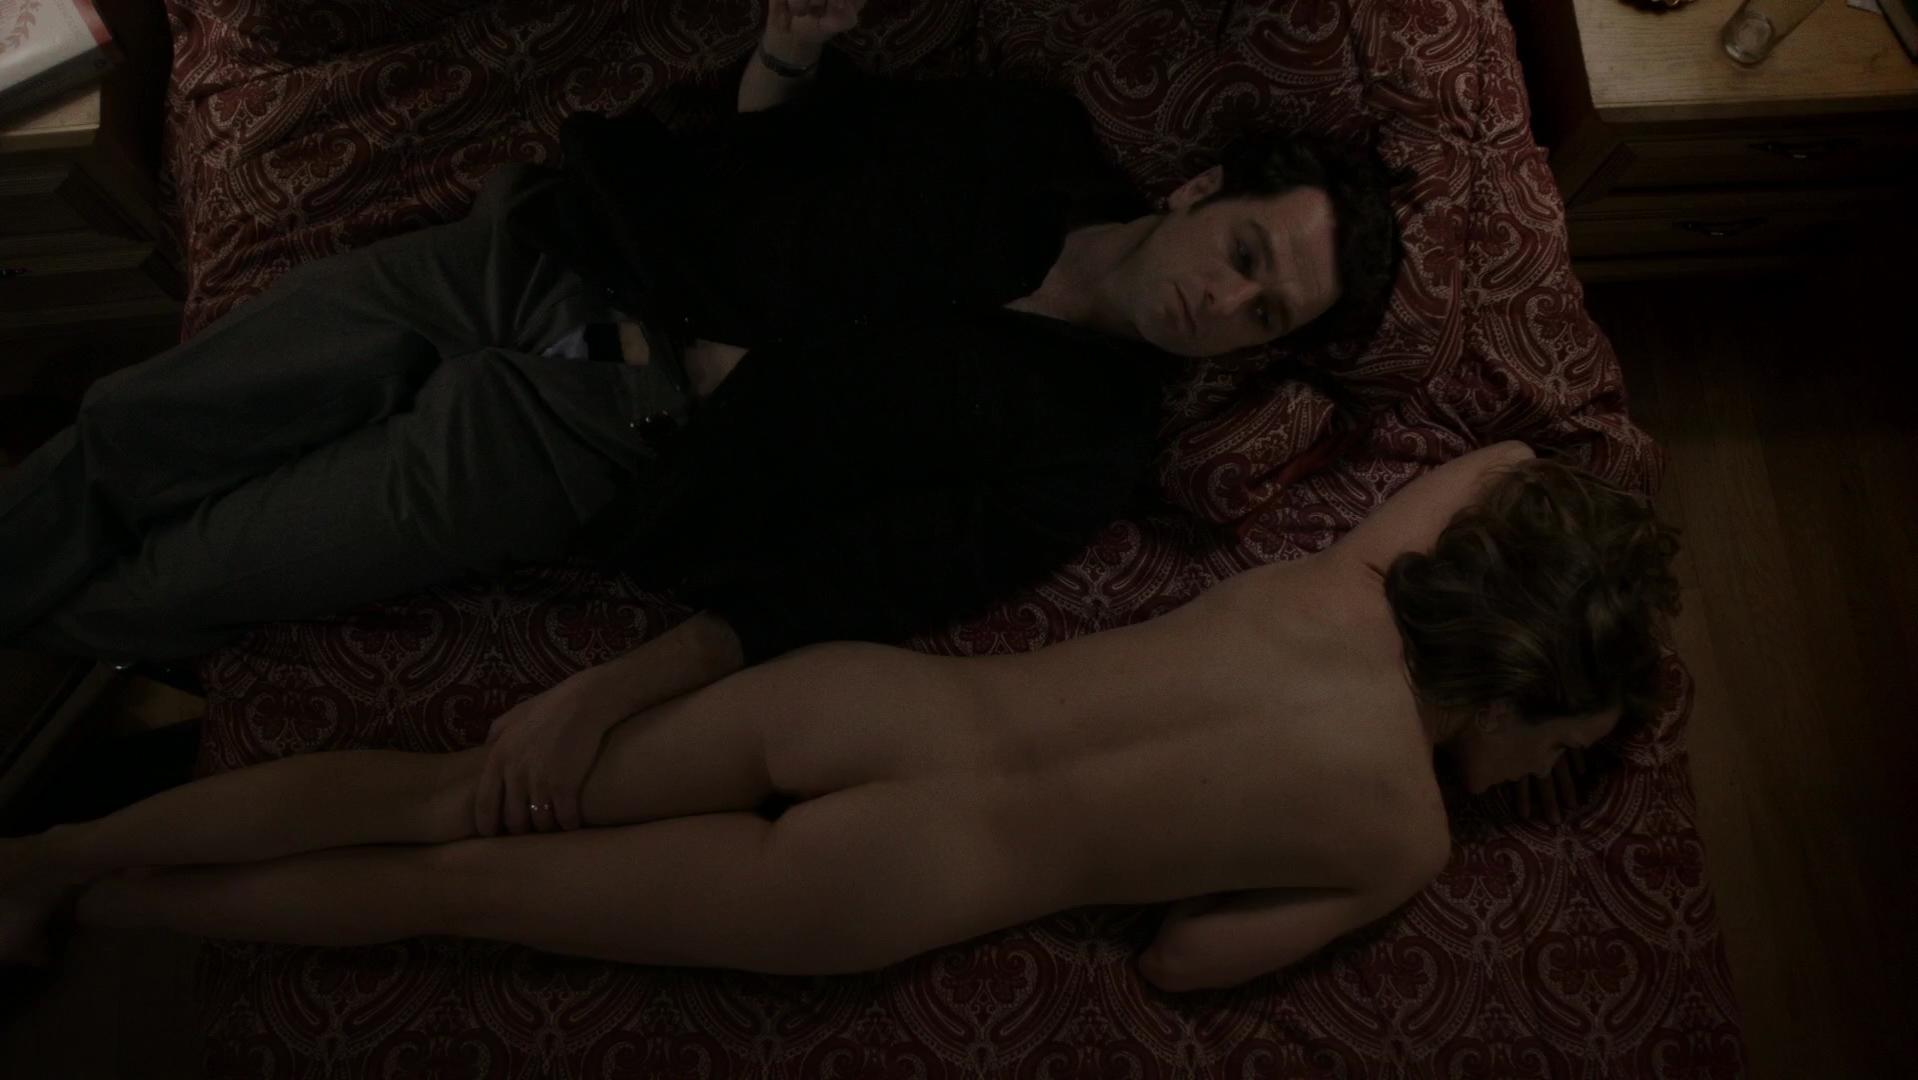 Keri Russell nude - The Americans s02e06 (2014)